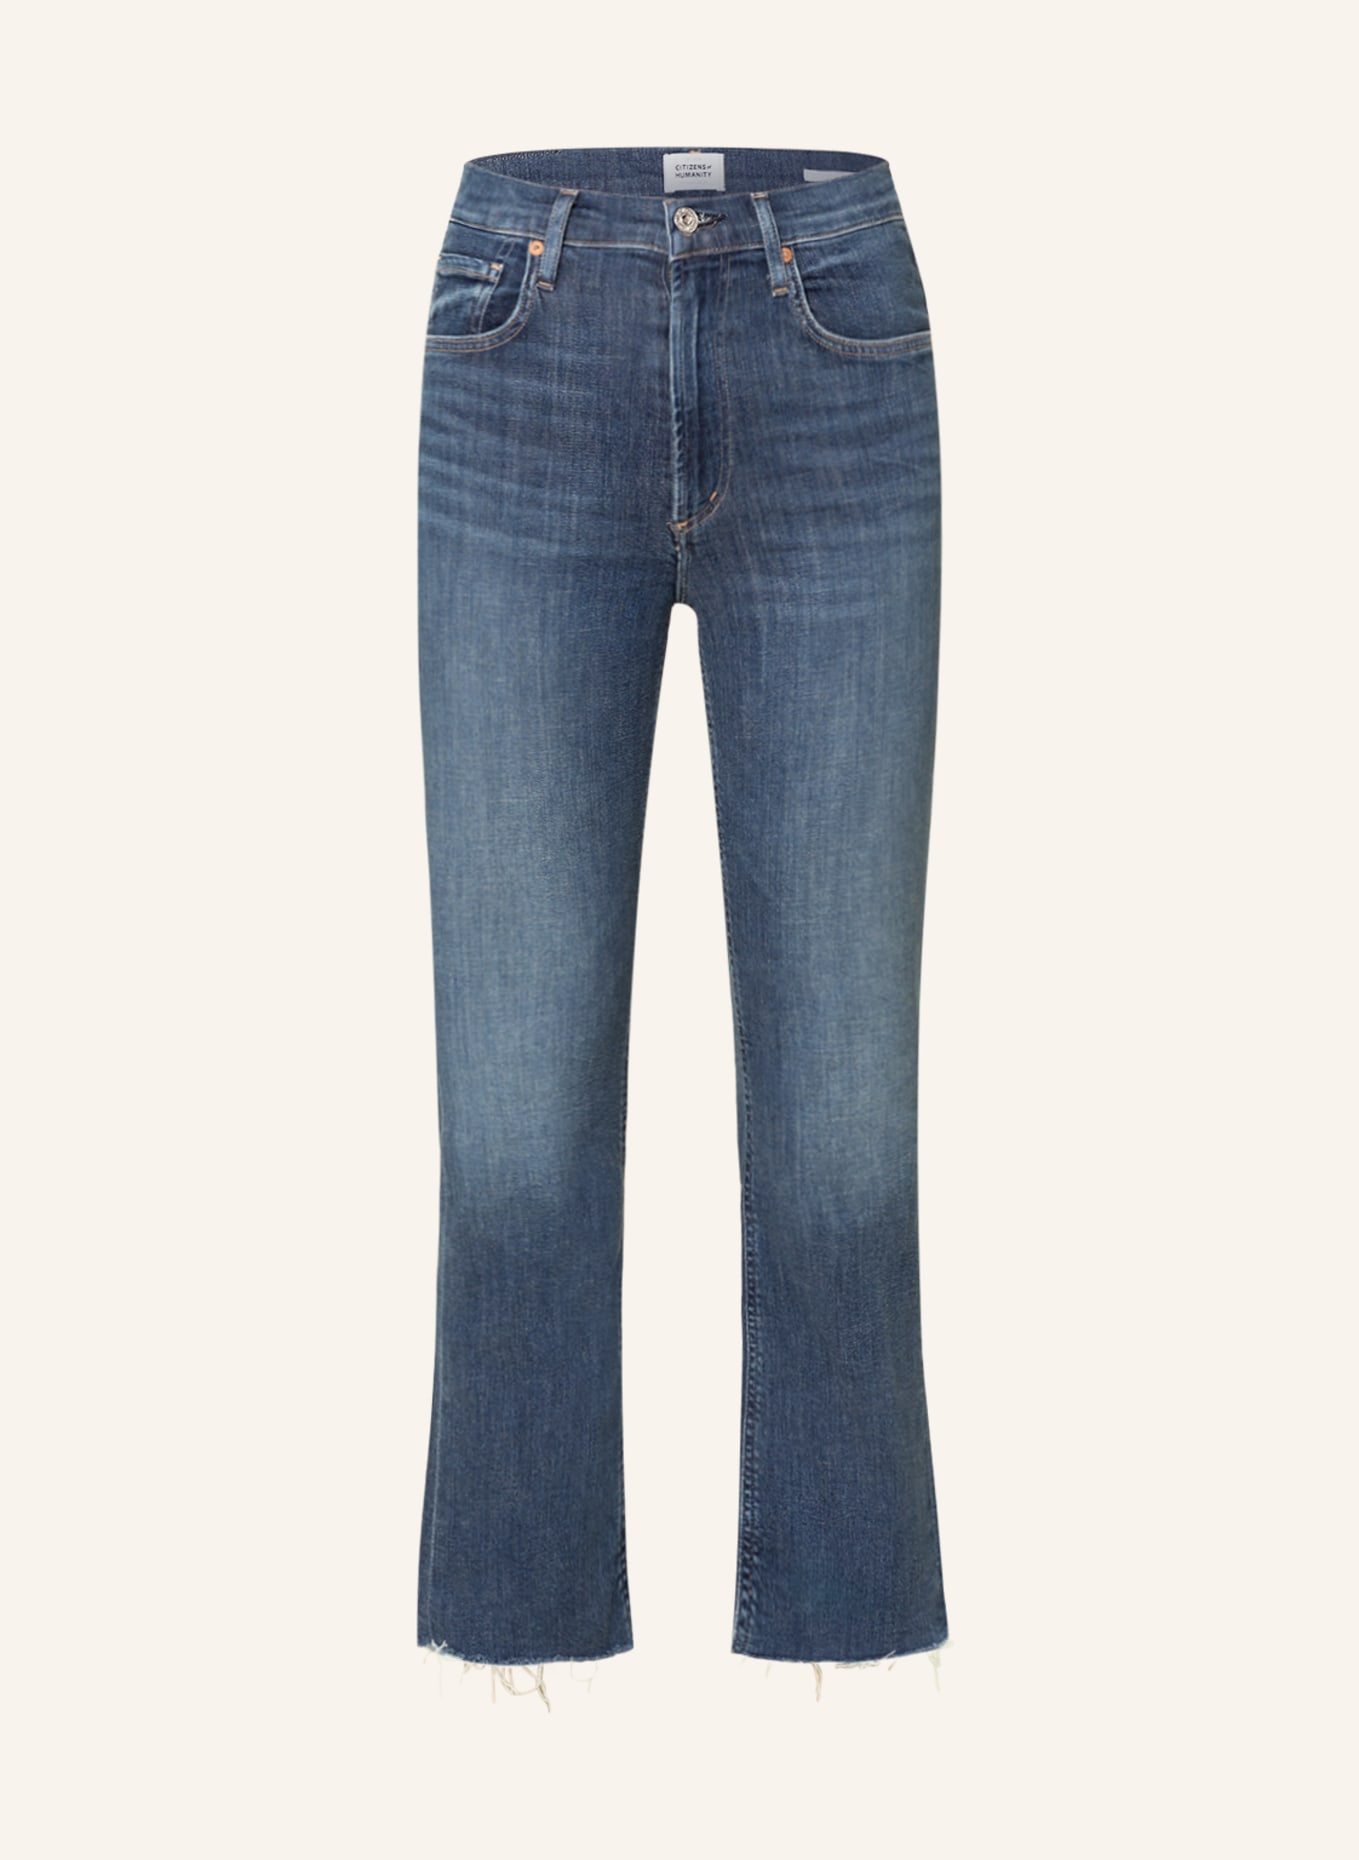 CITIZENS of HUMANITY Jeans ISOLA CROPPED, Farbe: Undercurrent md indigo (Bild 1)